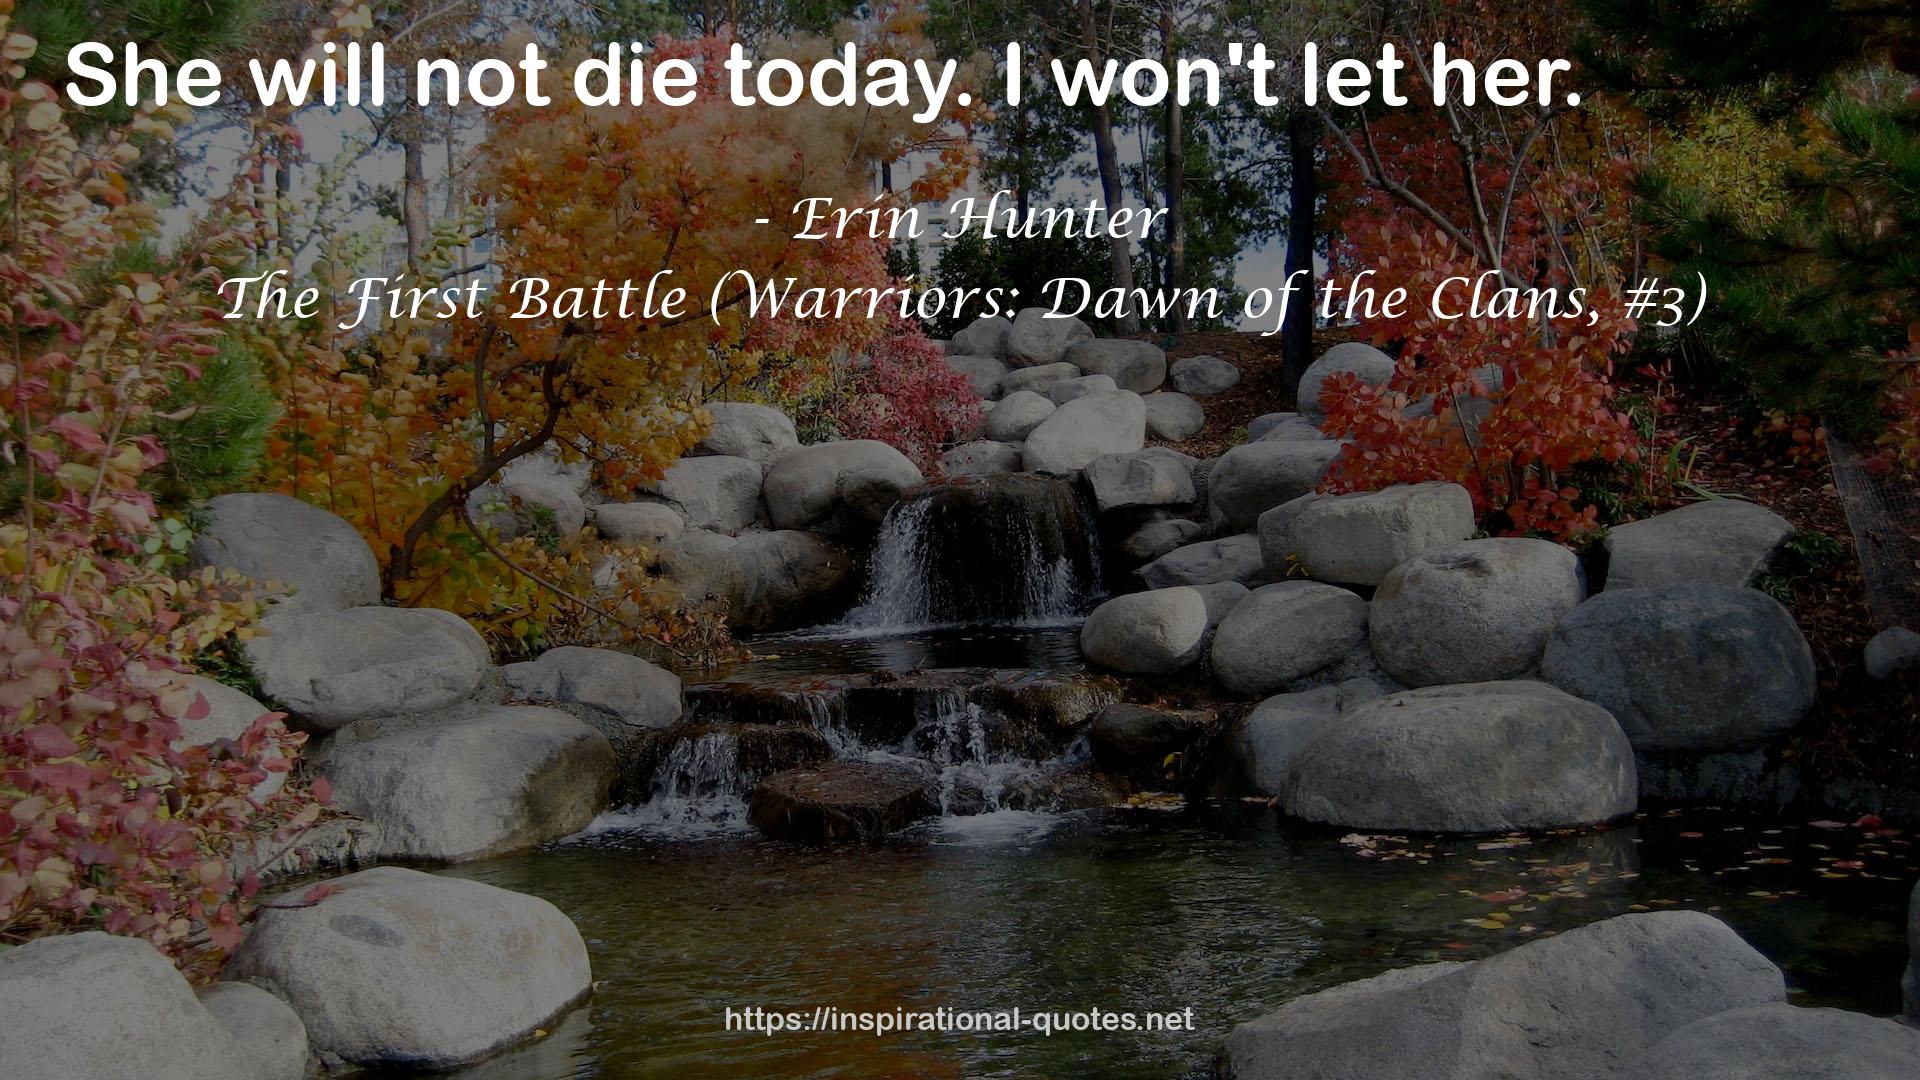 The First Battle (Warriors: Dawn of the Clans, #3) QUOTES